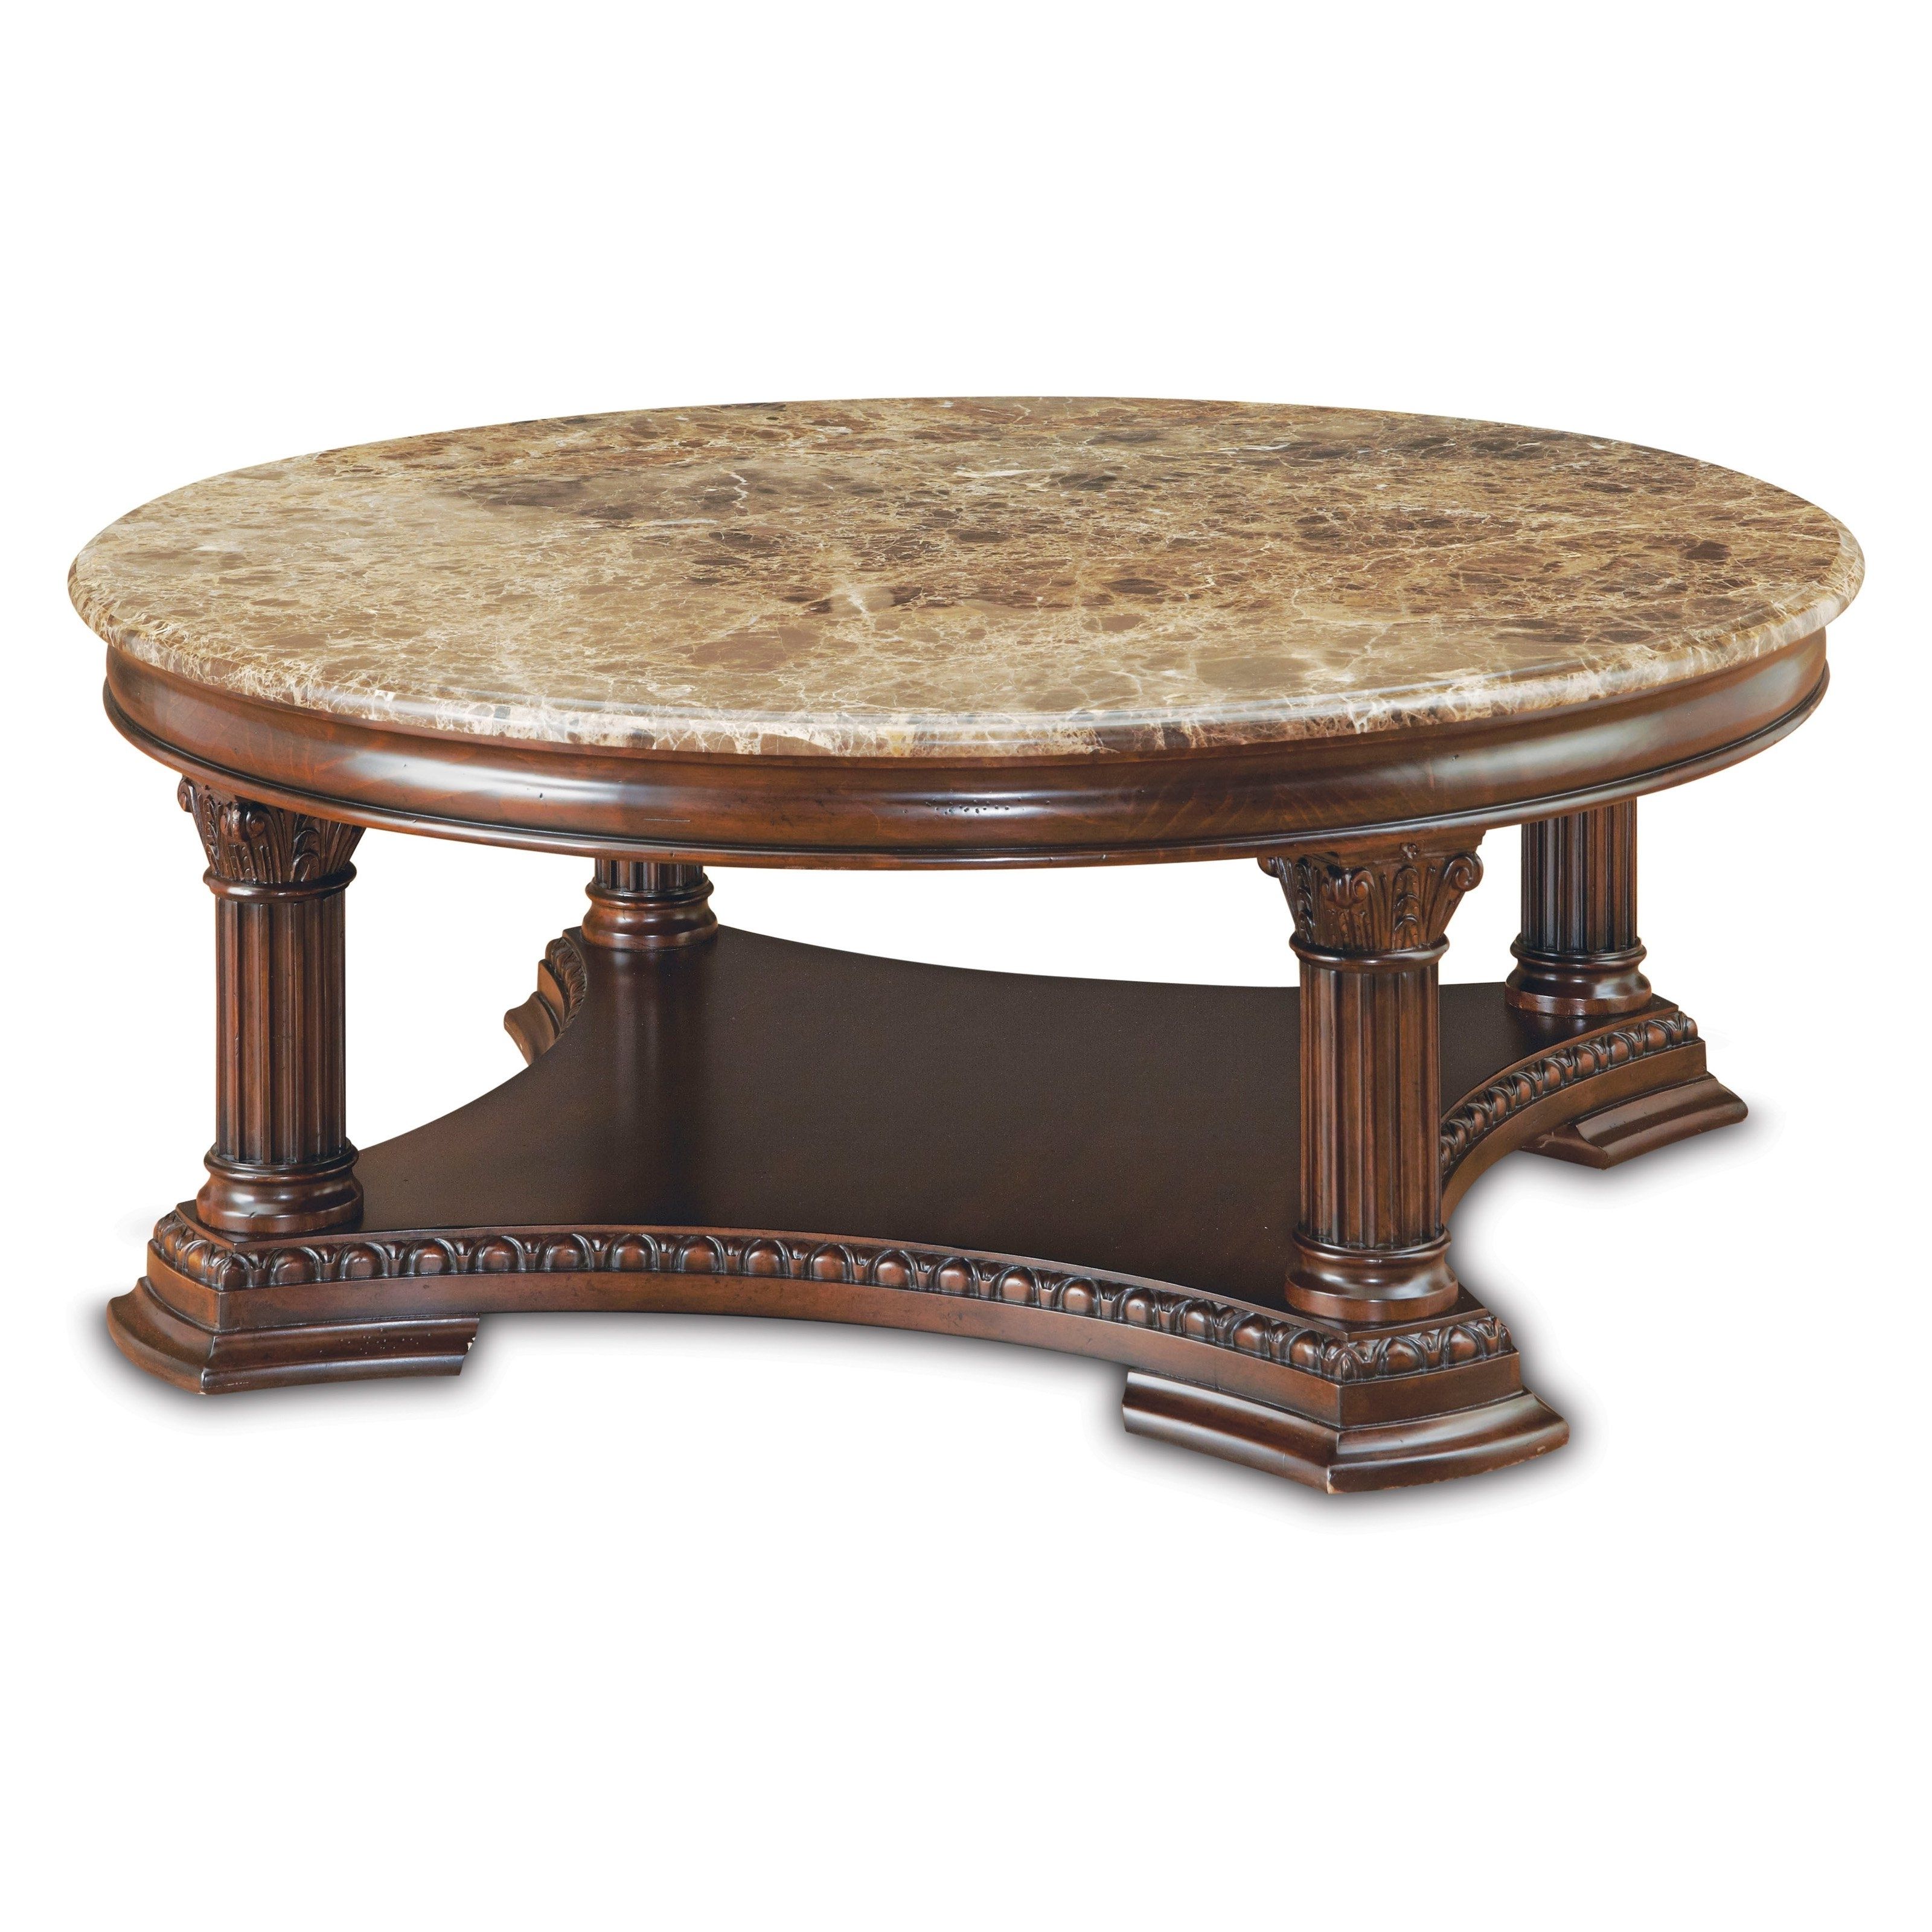 Stylish Carved Wood Coffee Table With Round Brown Polished Teak Wood Inside Preferred Round Carved Wood Coffee Tables (Gallery 19 of 20)